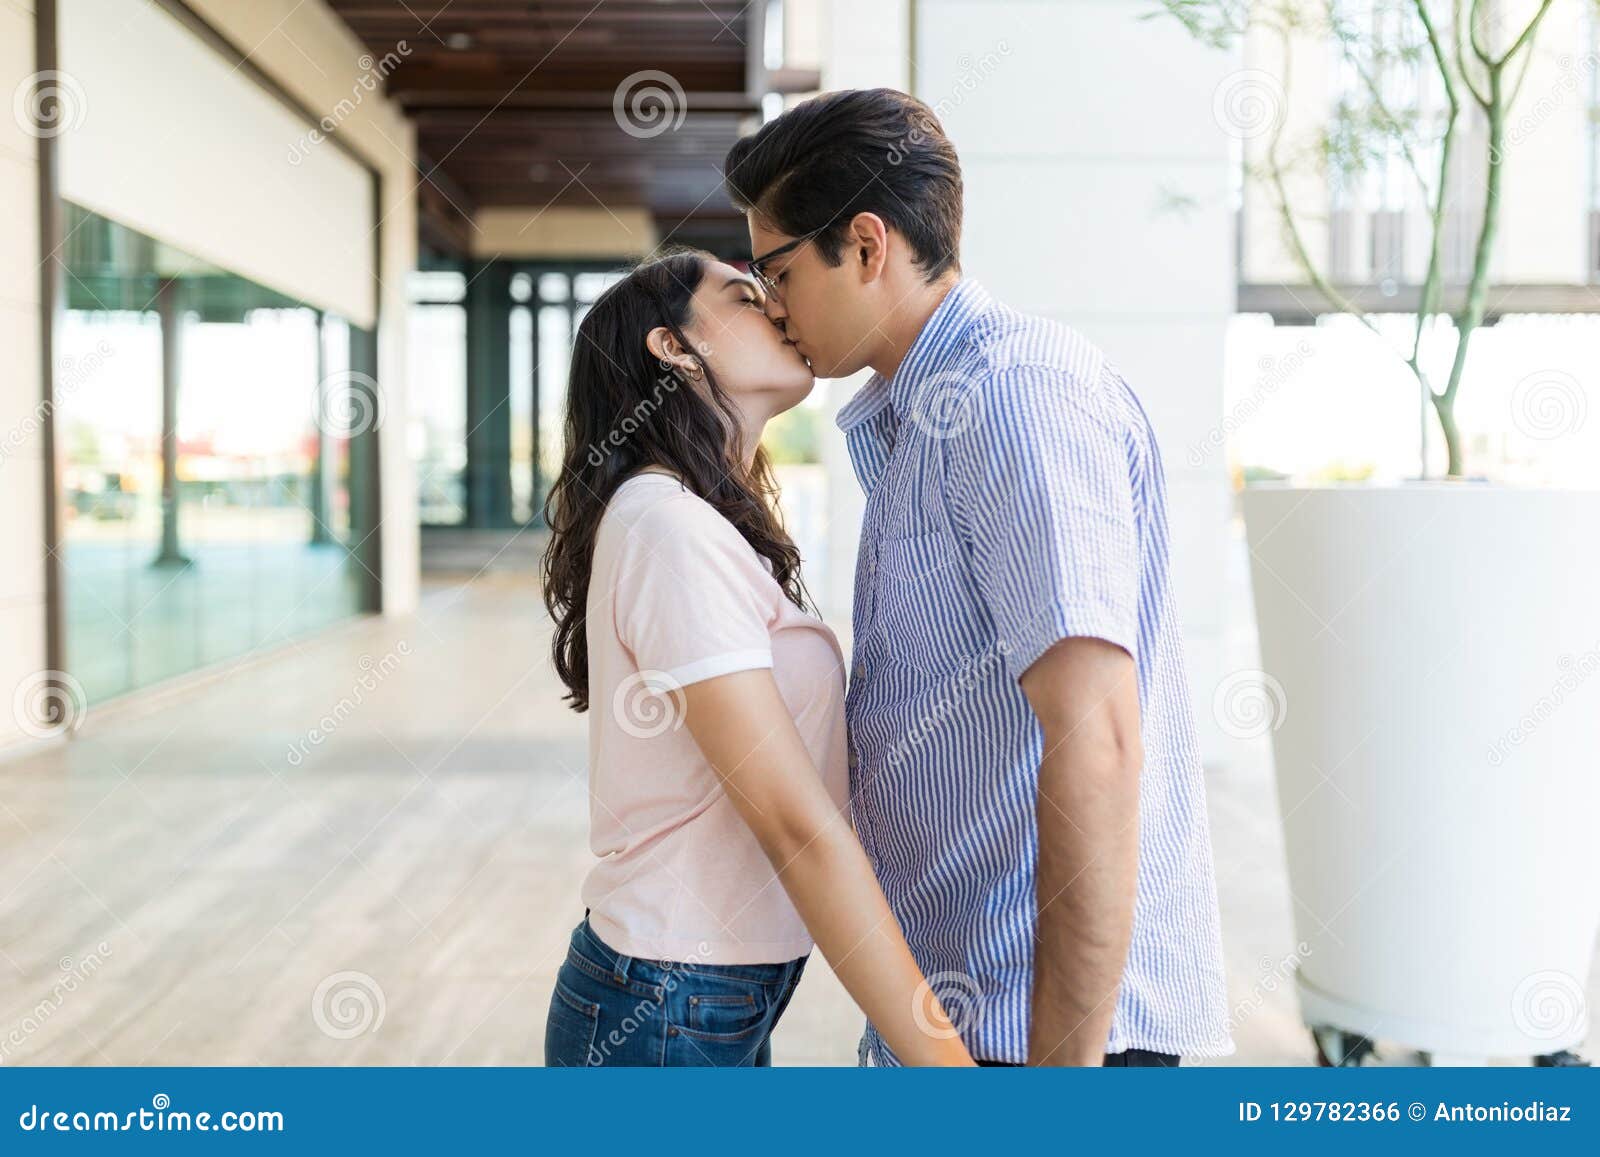 Cute Couple Kissing Each Other on Weekend Stock Photo - Image of ...